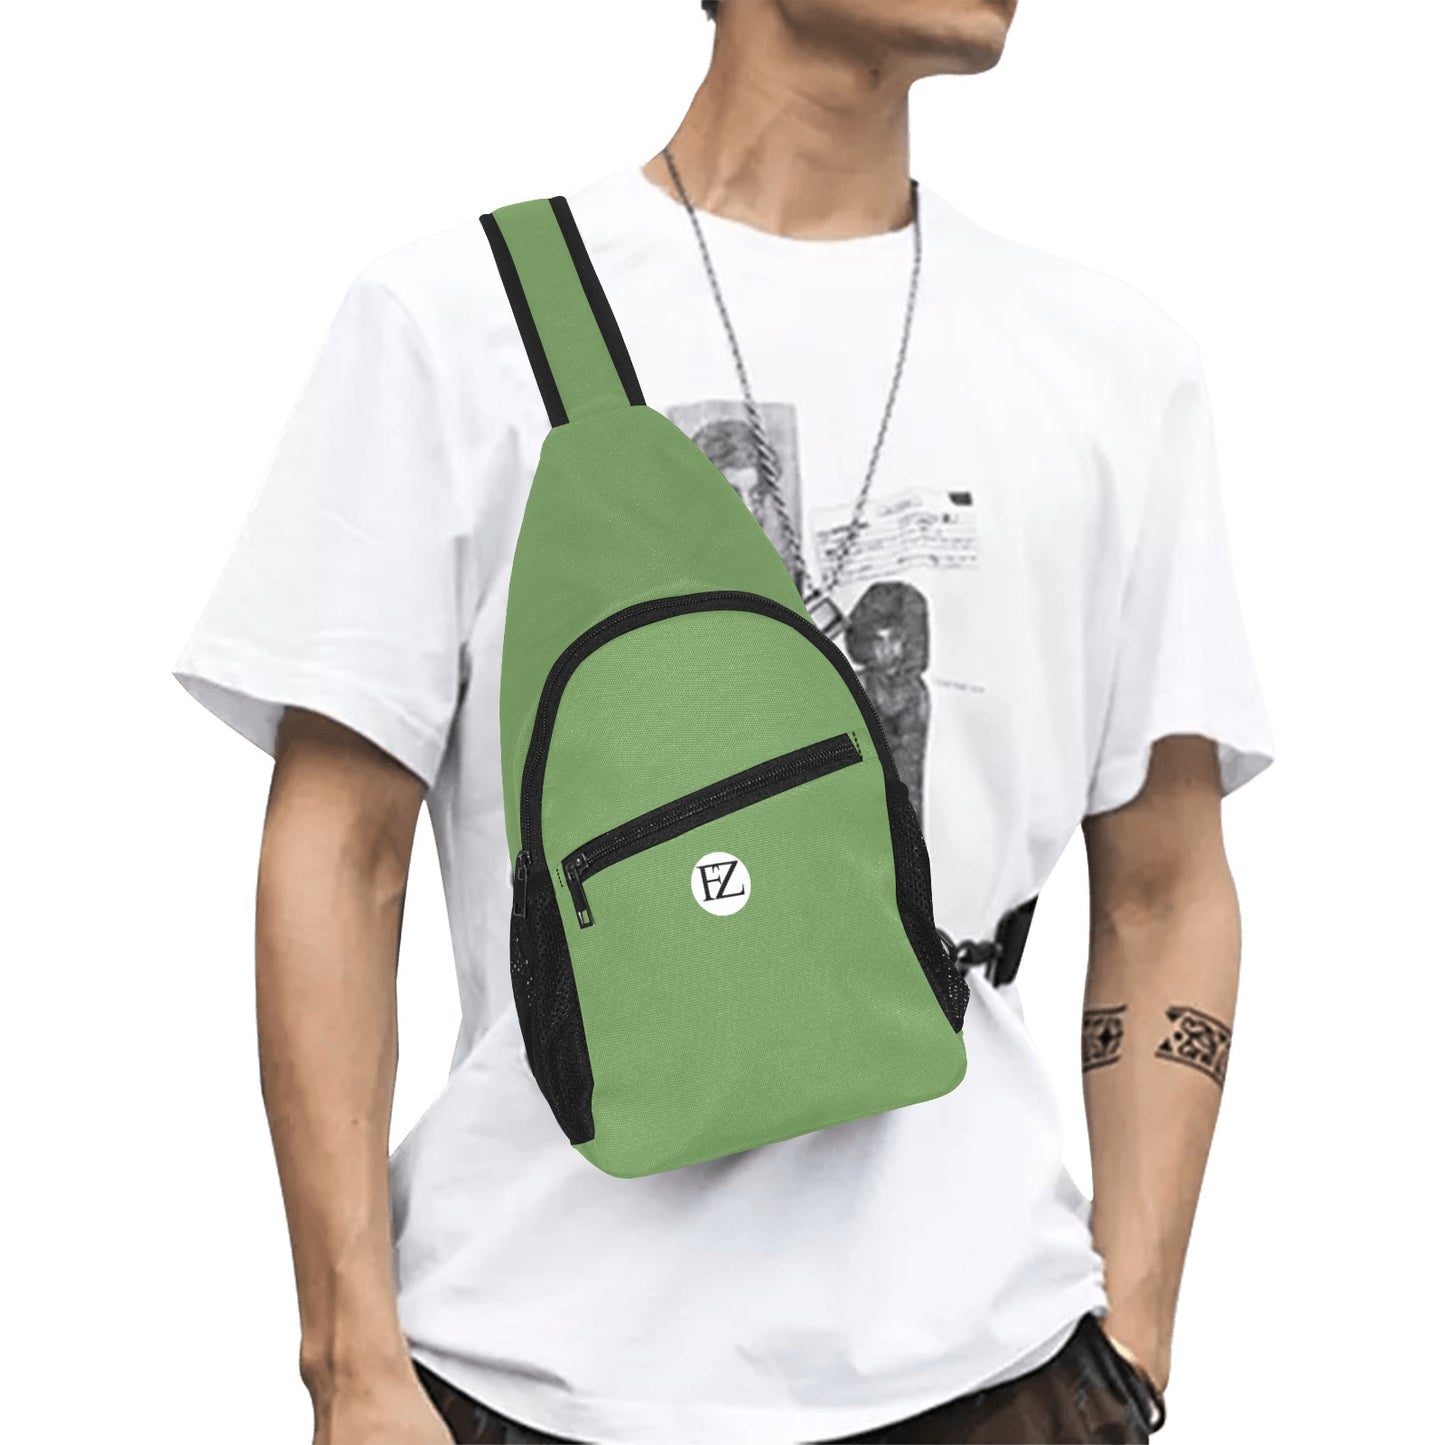 fz men's chest bag too one size / fz chest bag-green all over print chest bag(model1719)